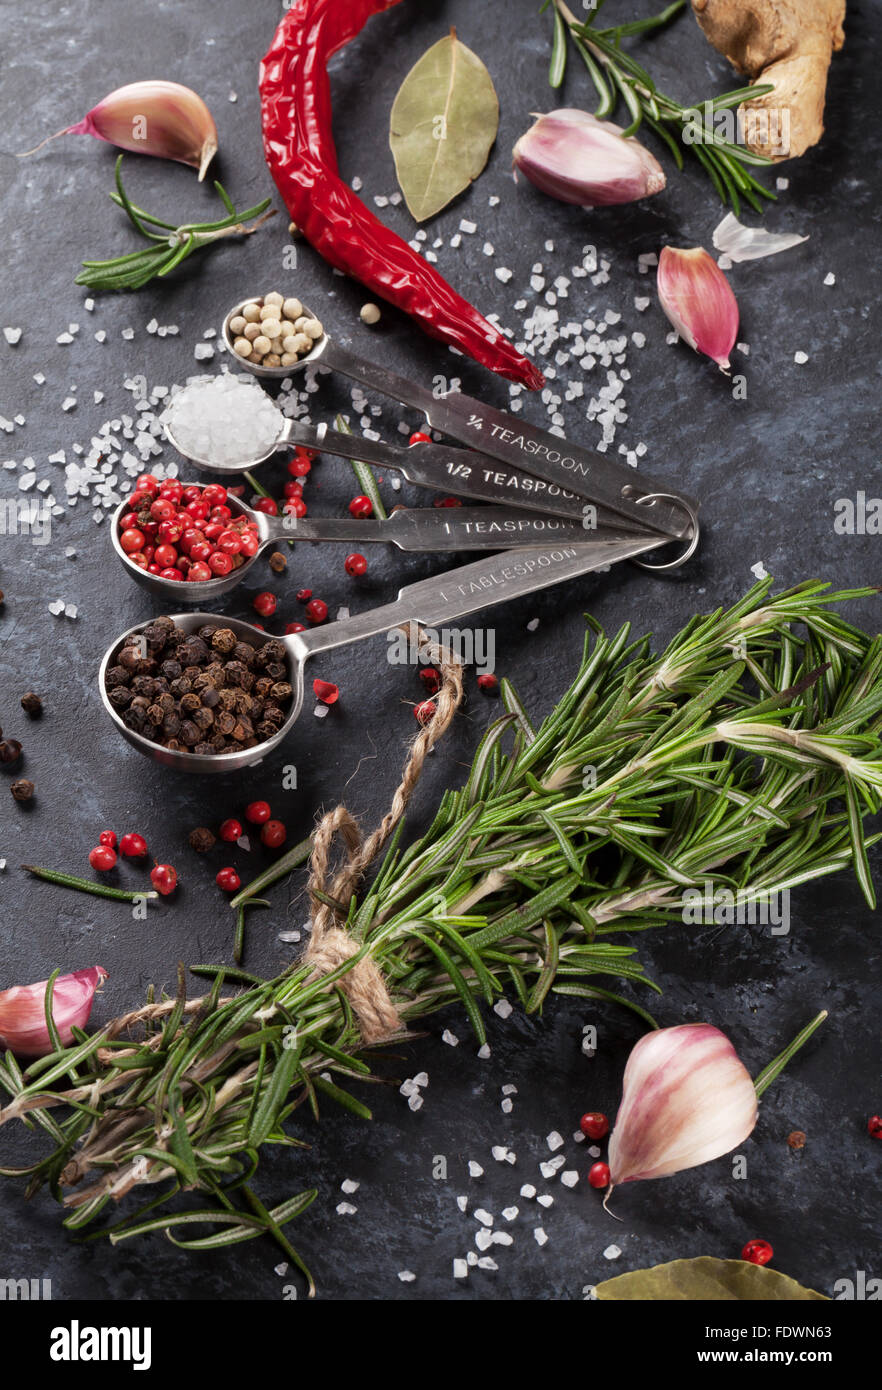 Herbs and spices over black stone background Stock Photo